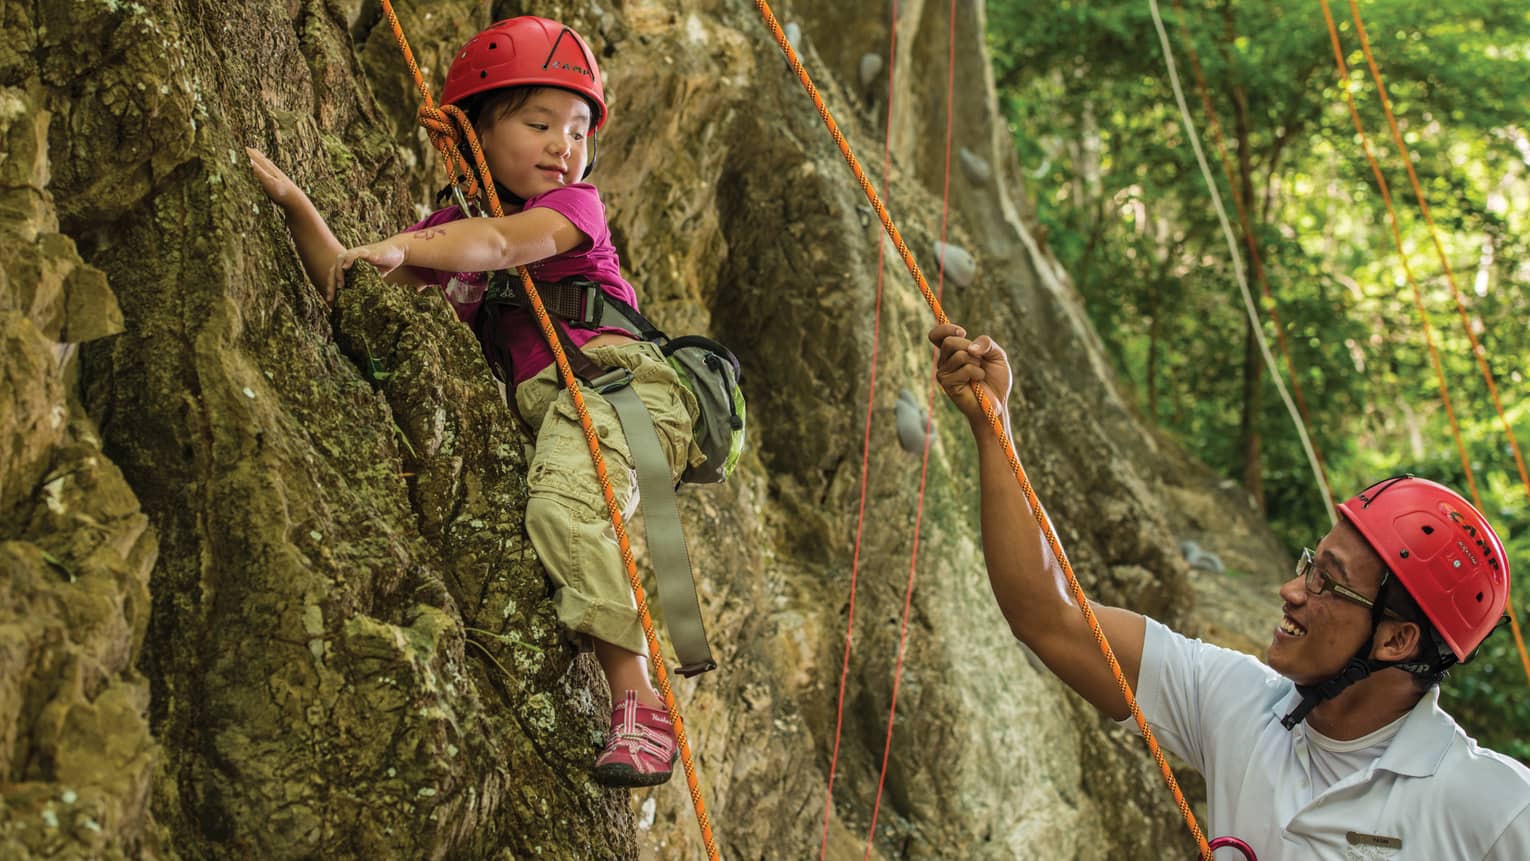 Man holds rope, helps young girl wearing helmet climb rock face